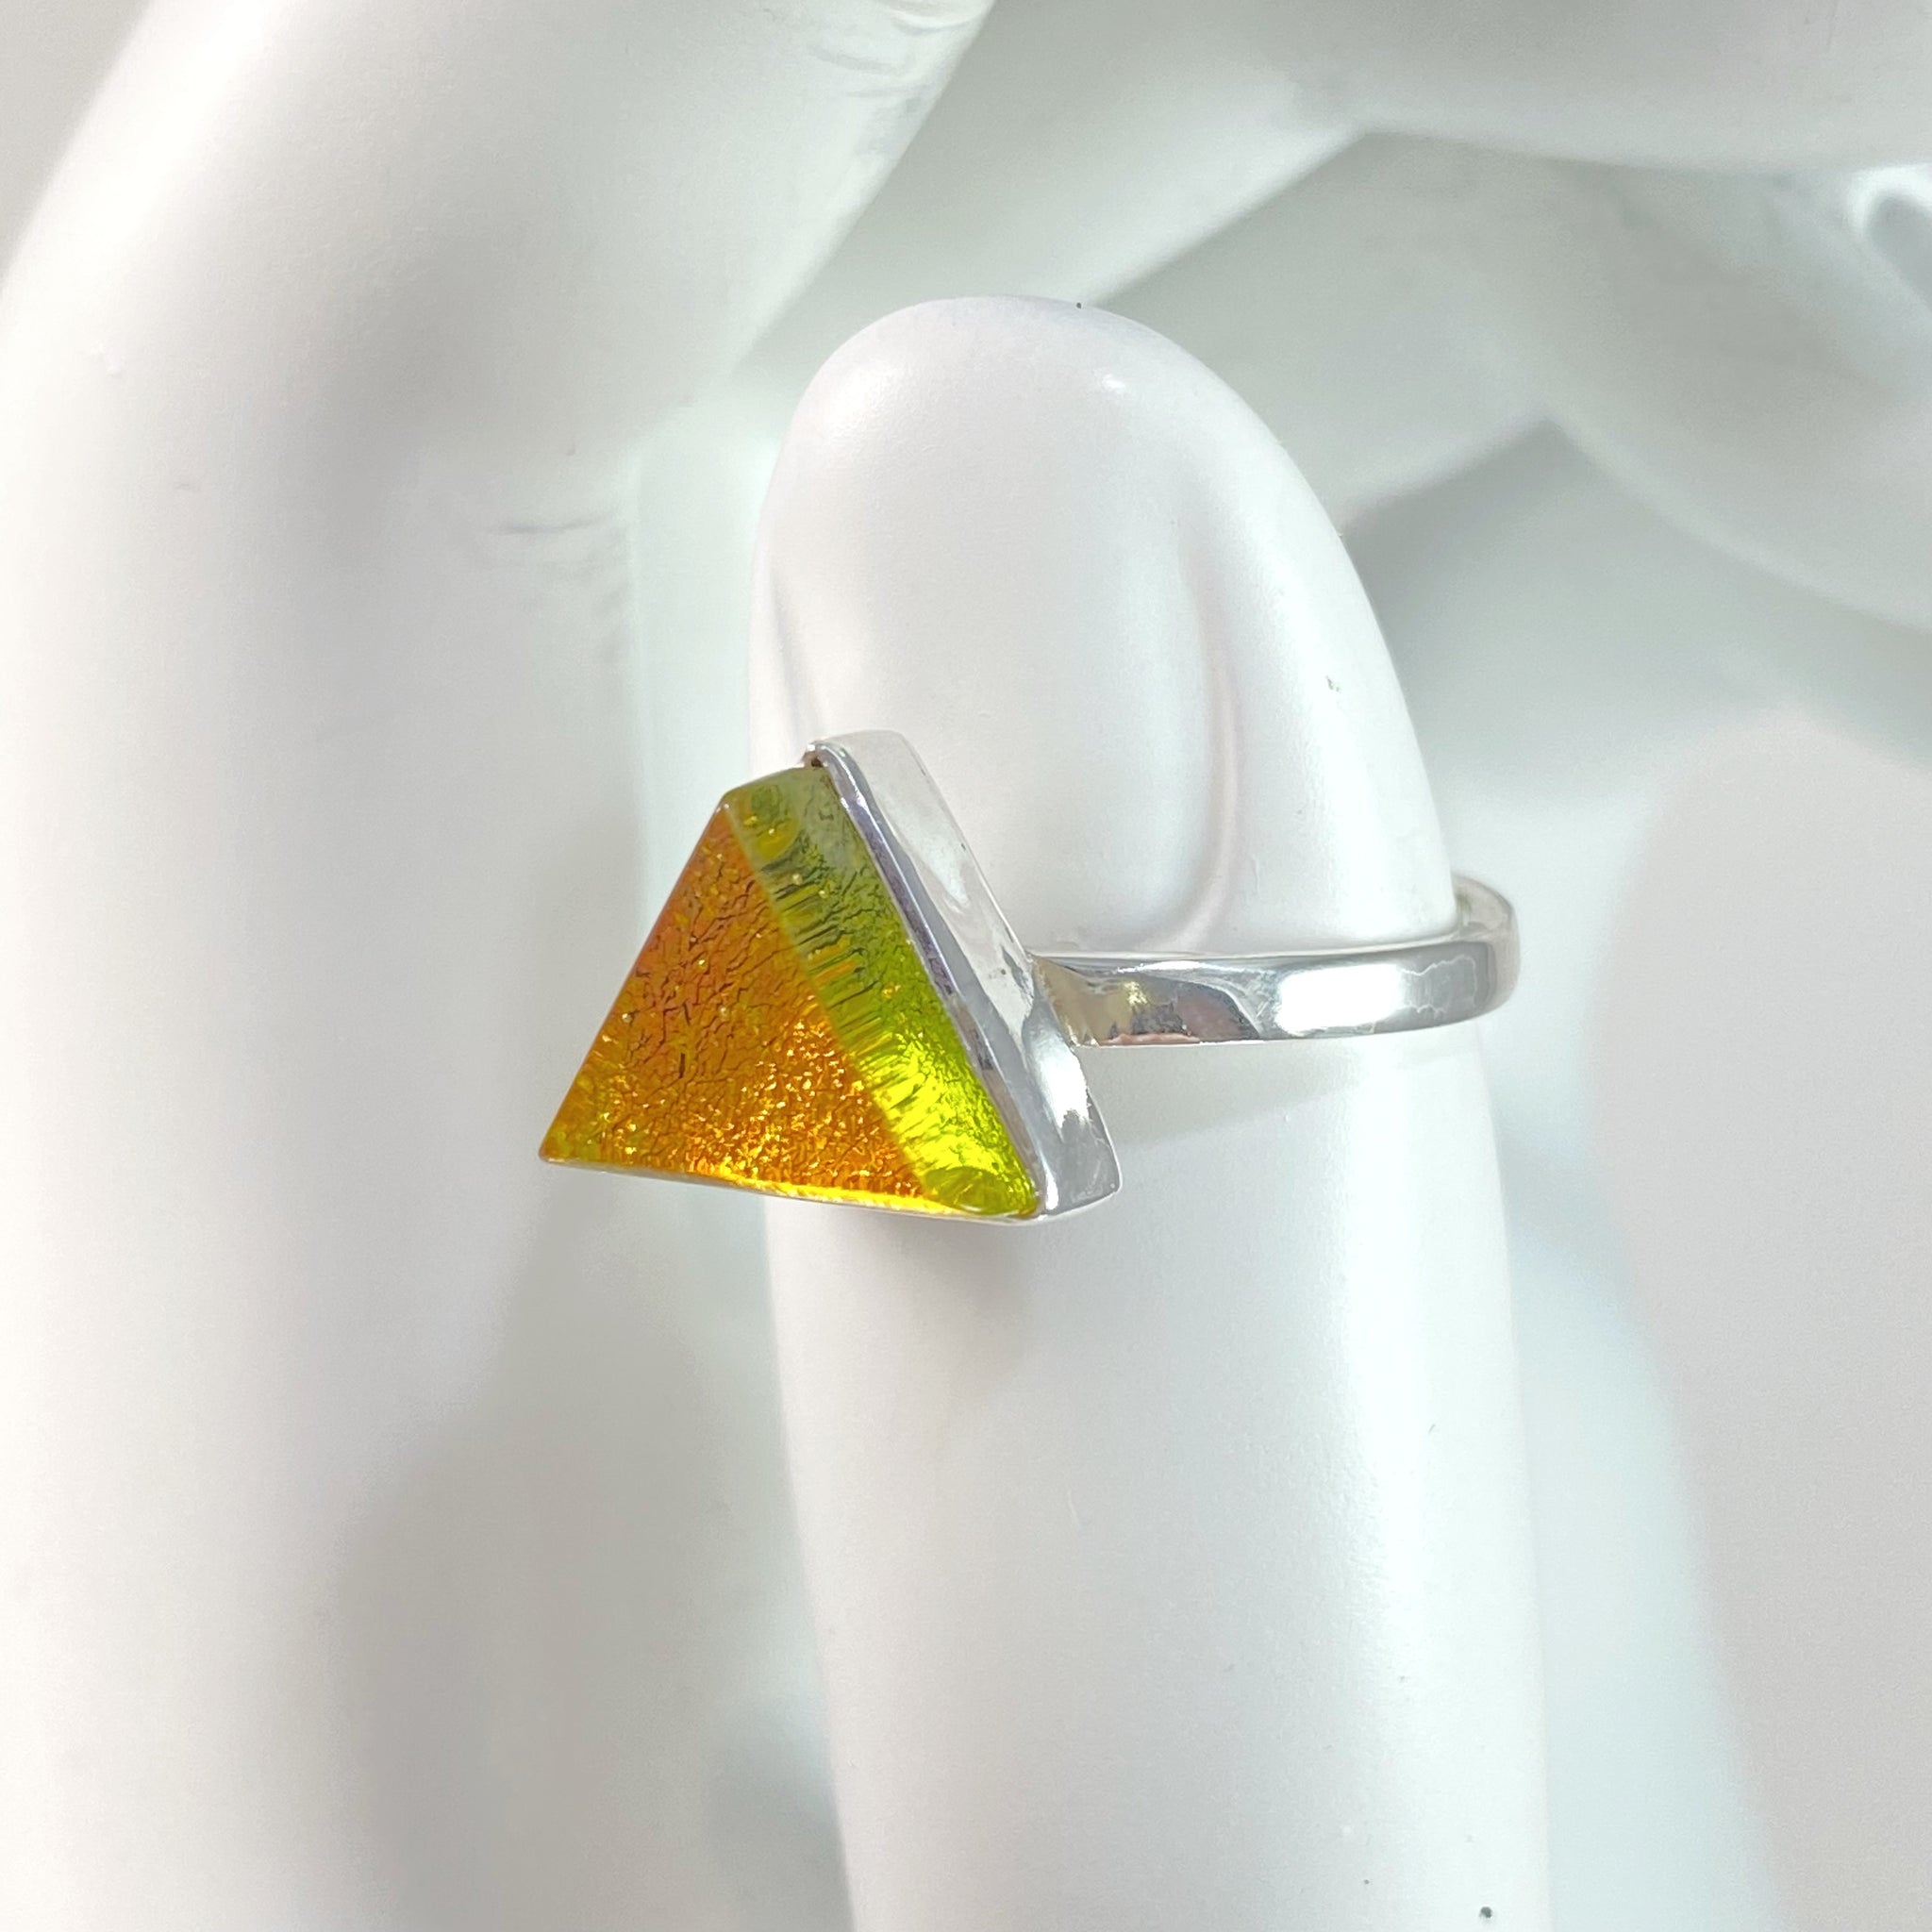 amber gold glass triangle ring, fused glass, glass jewelry, glass and silver jewelry, handmade, handcrafted, American Craft, hand fabricated jewelry, hand fabricated jewellery, Athens, Georgia, colorful jewelry, sparkle, bullseye glass, dichroic glass, art jewelry